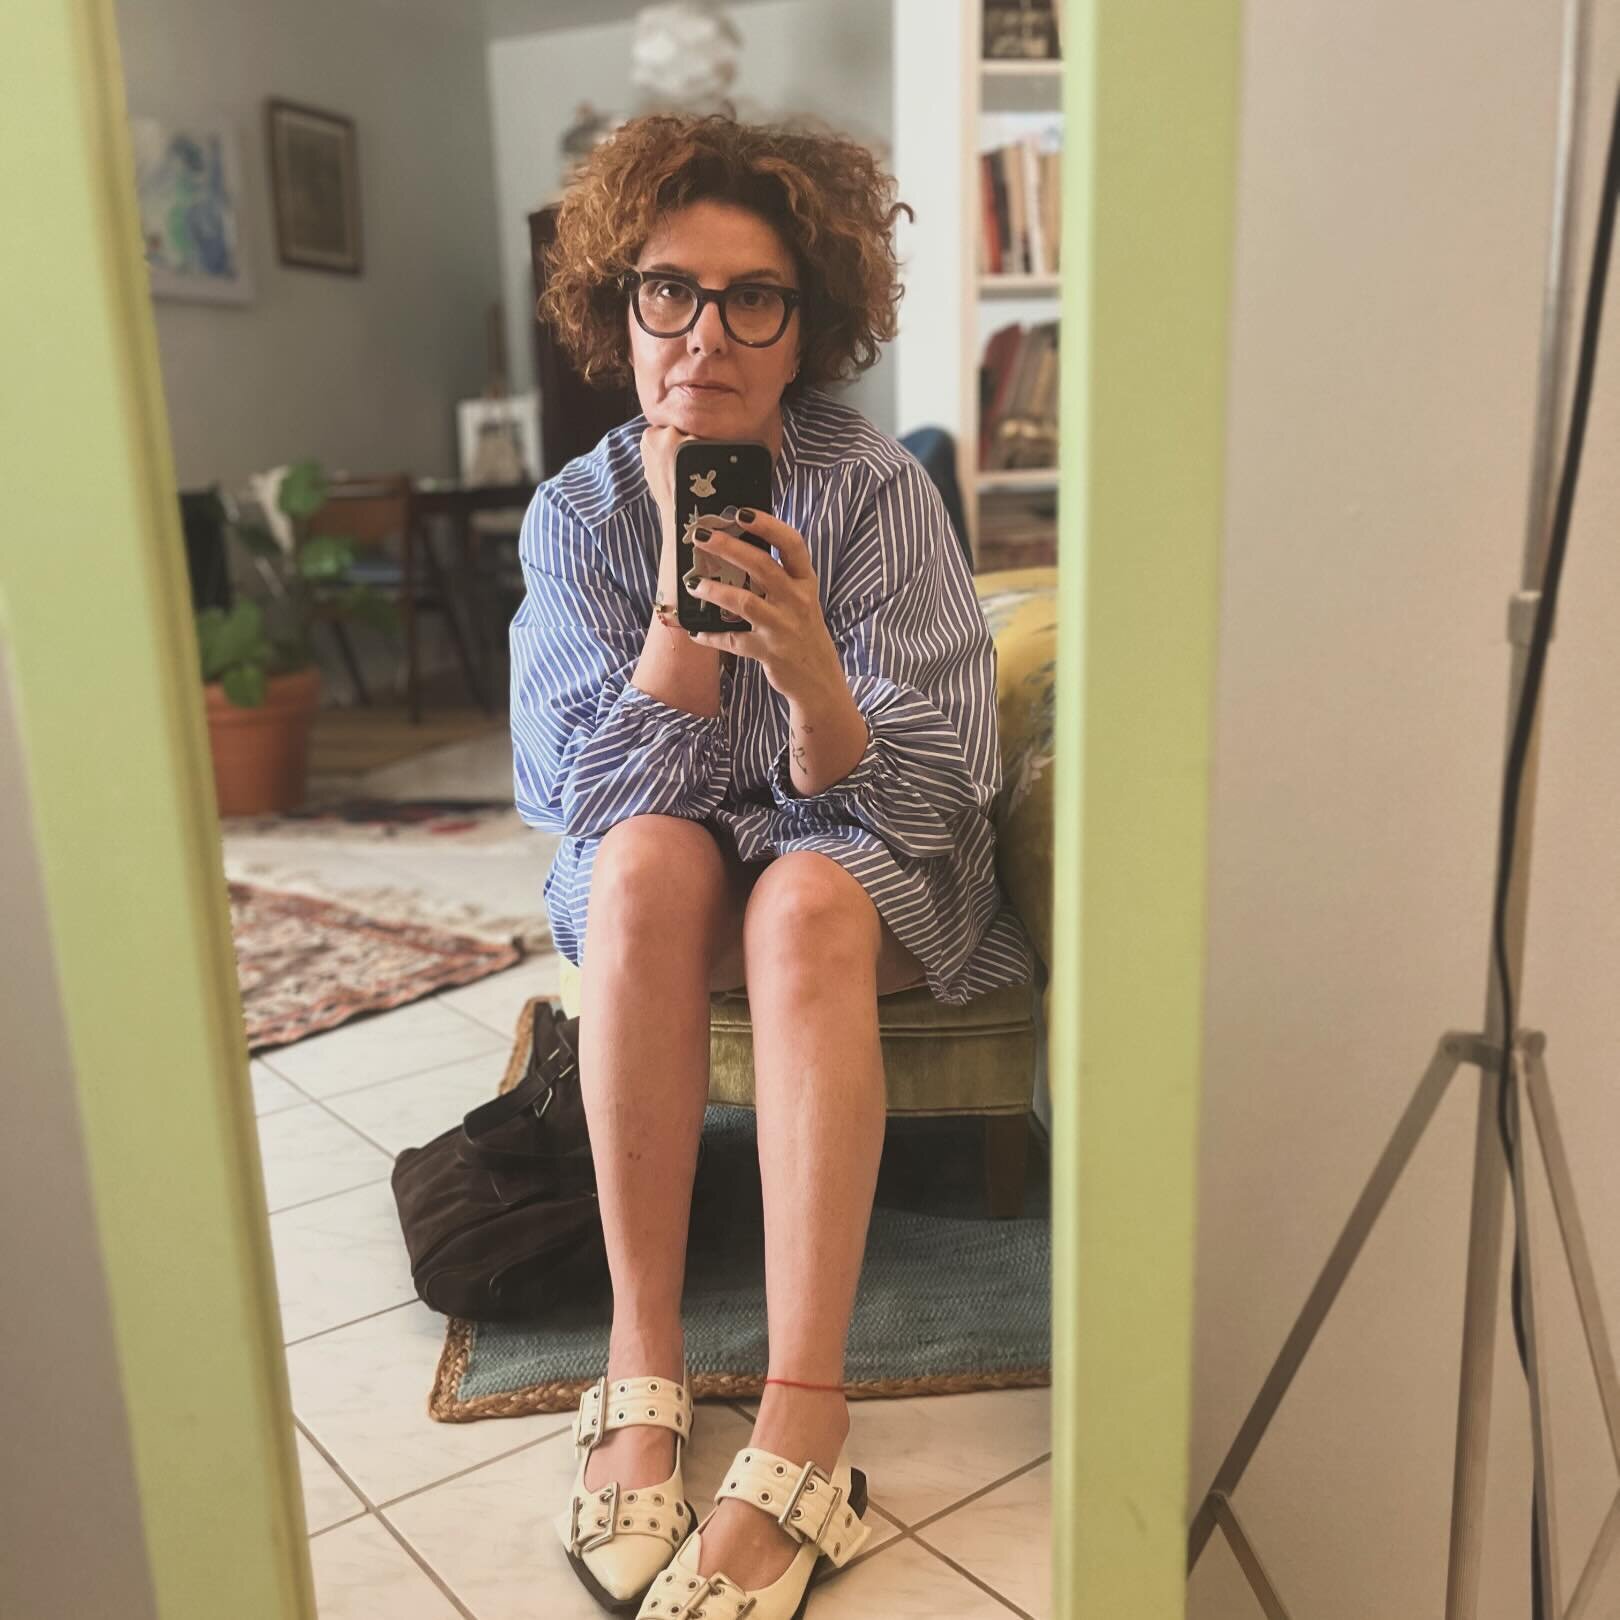 In an usual extreme case of humidity, my hair and I went to work, we brought with us my olive green under-eye bags and my fave white flats. And I know the patriarchal world we live in decided to slap International Women&rsquo;s Day on the calendar, b